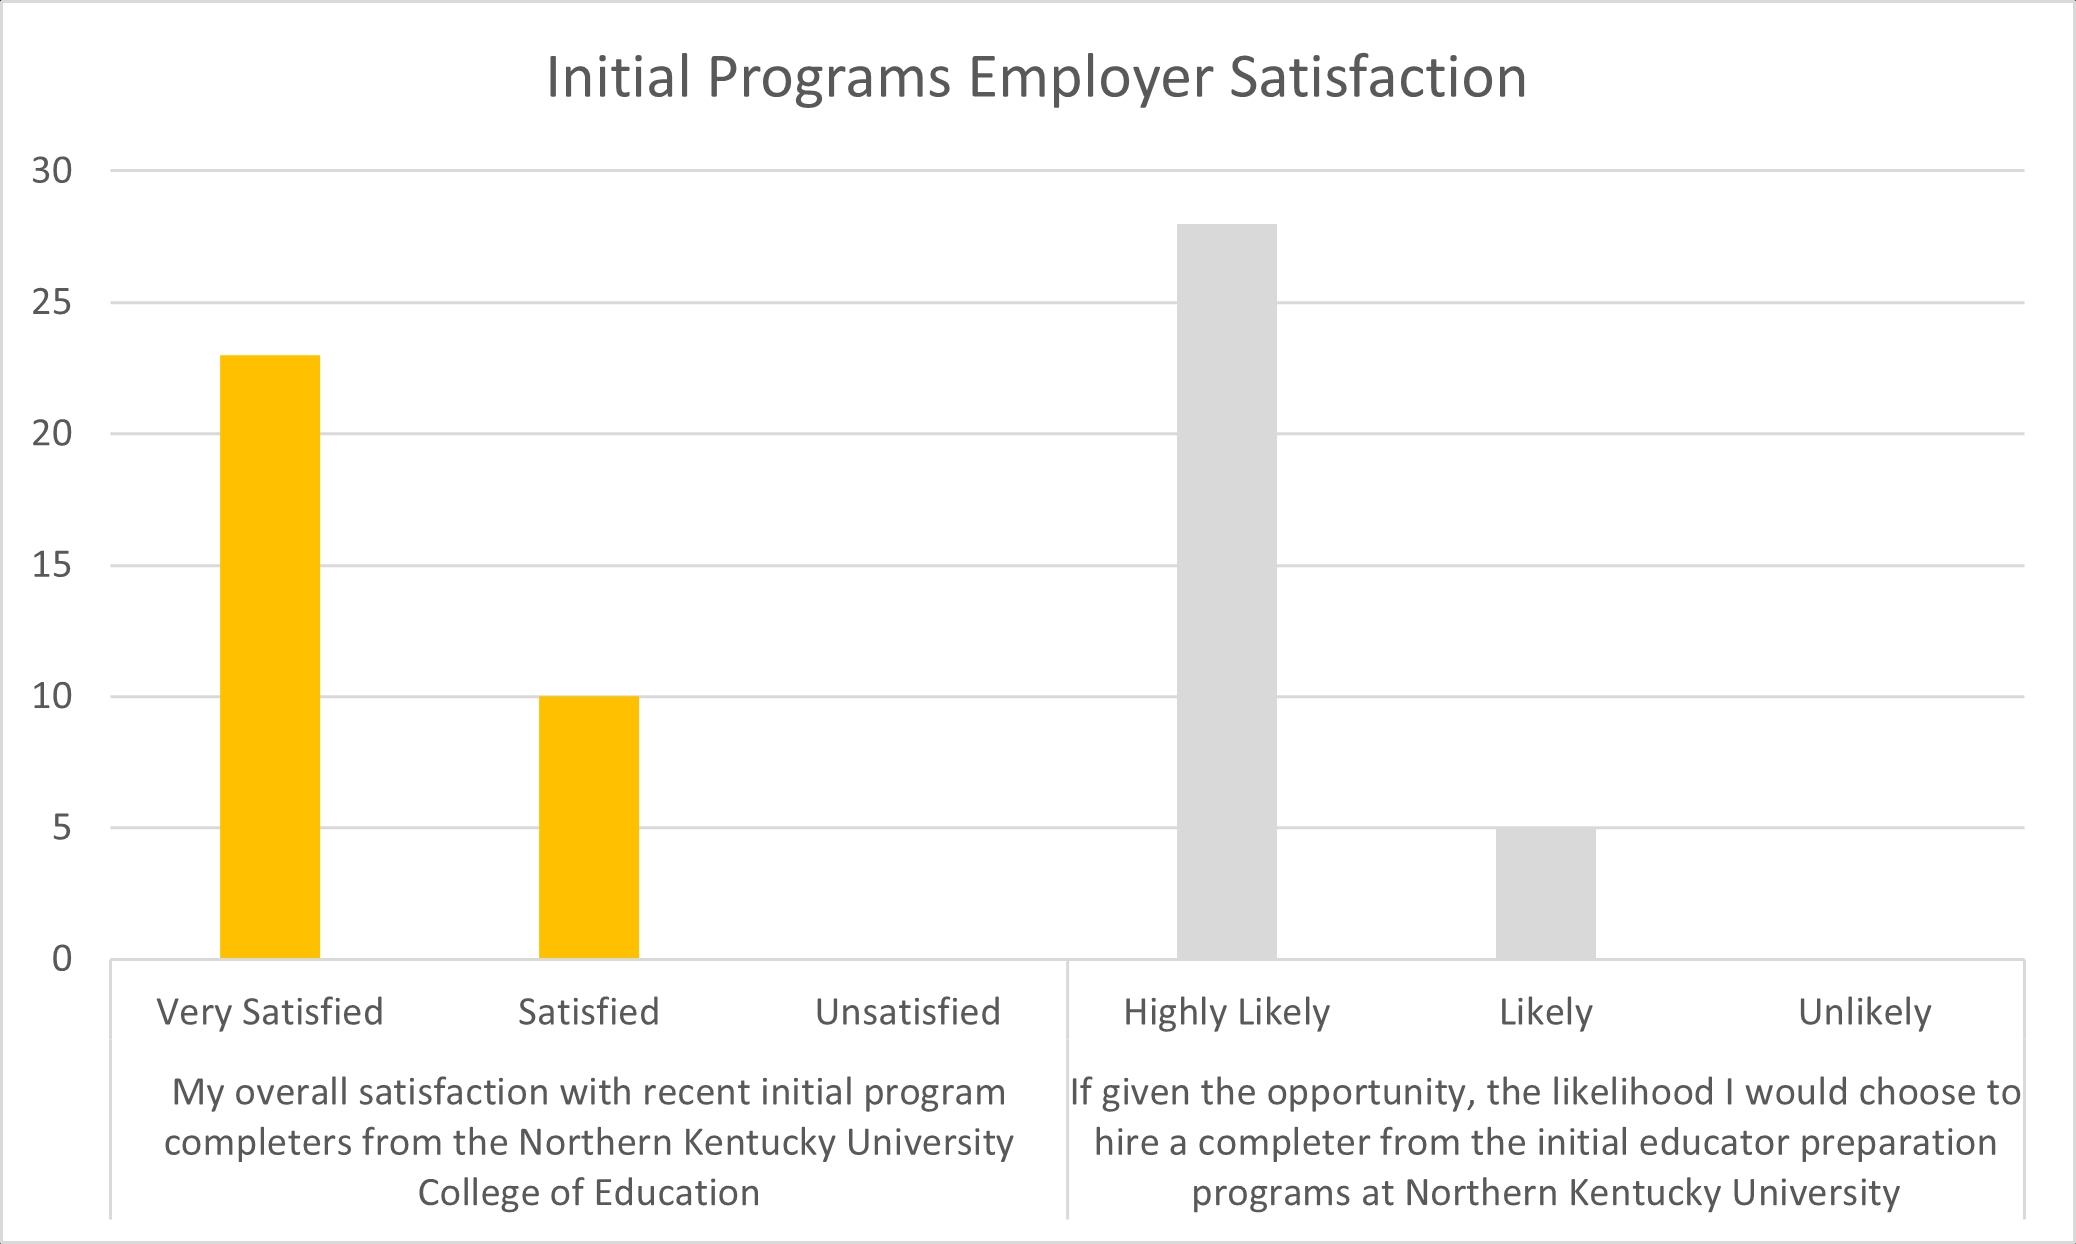 Graph of Initial Programs Employer Satisfaction 